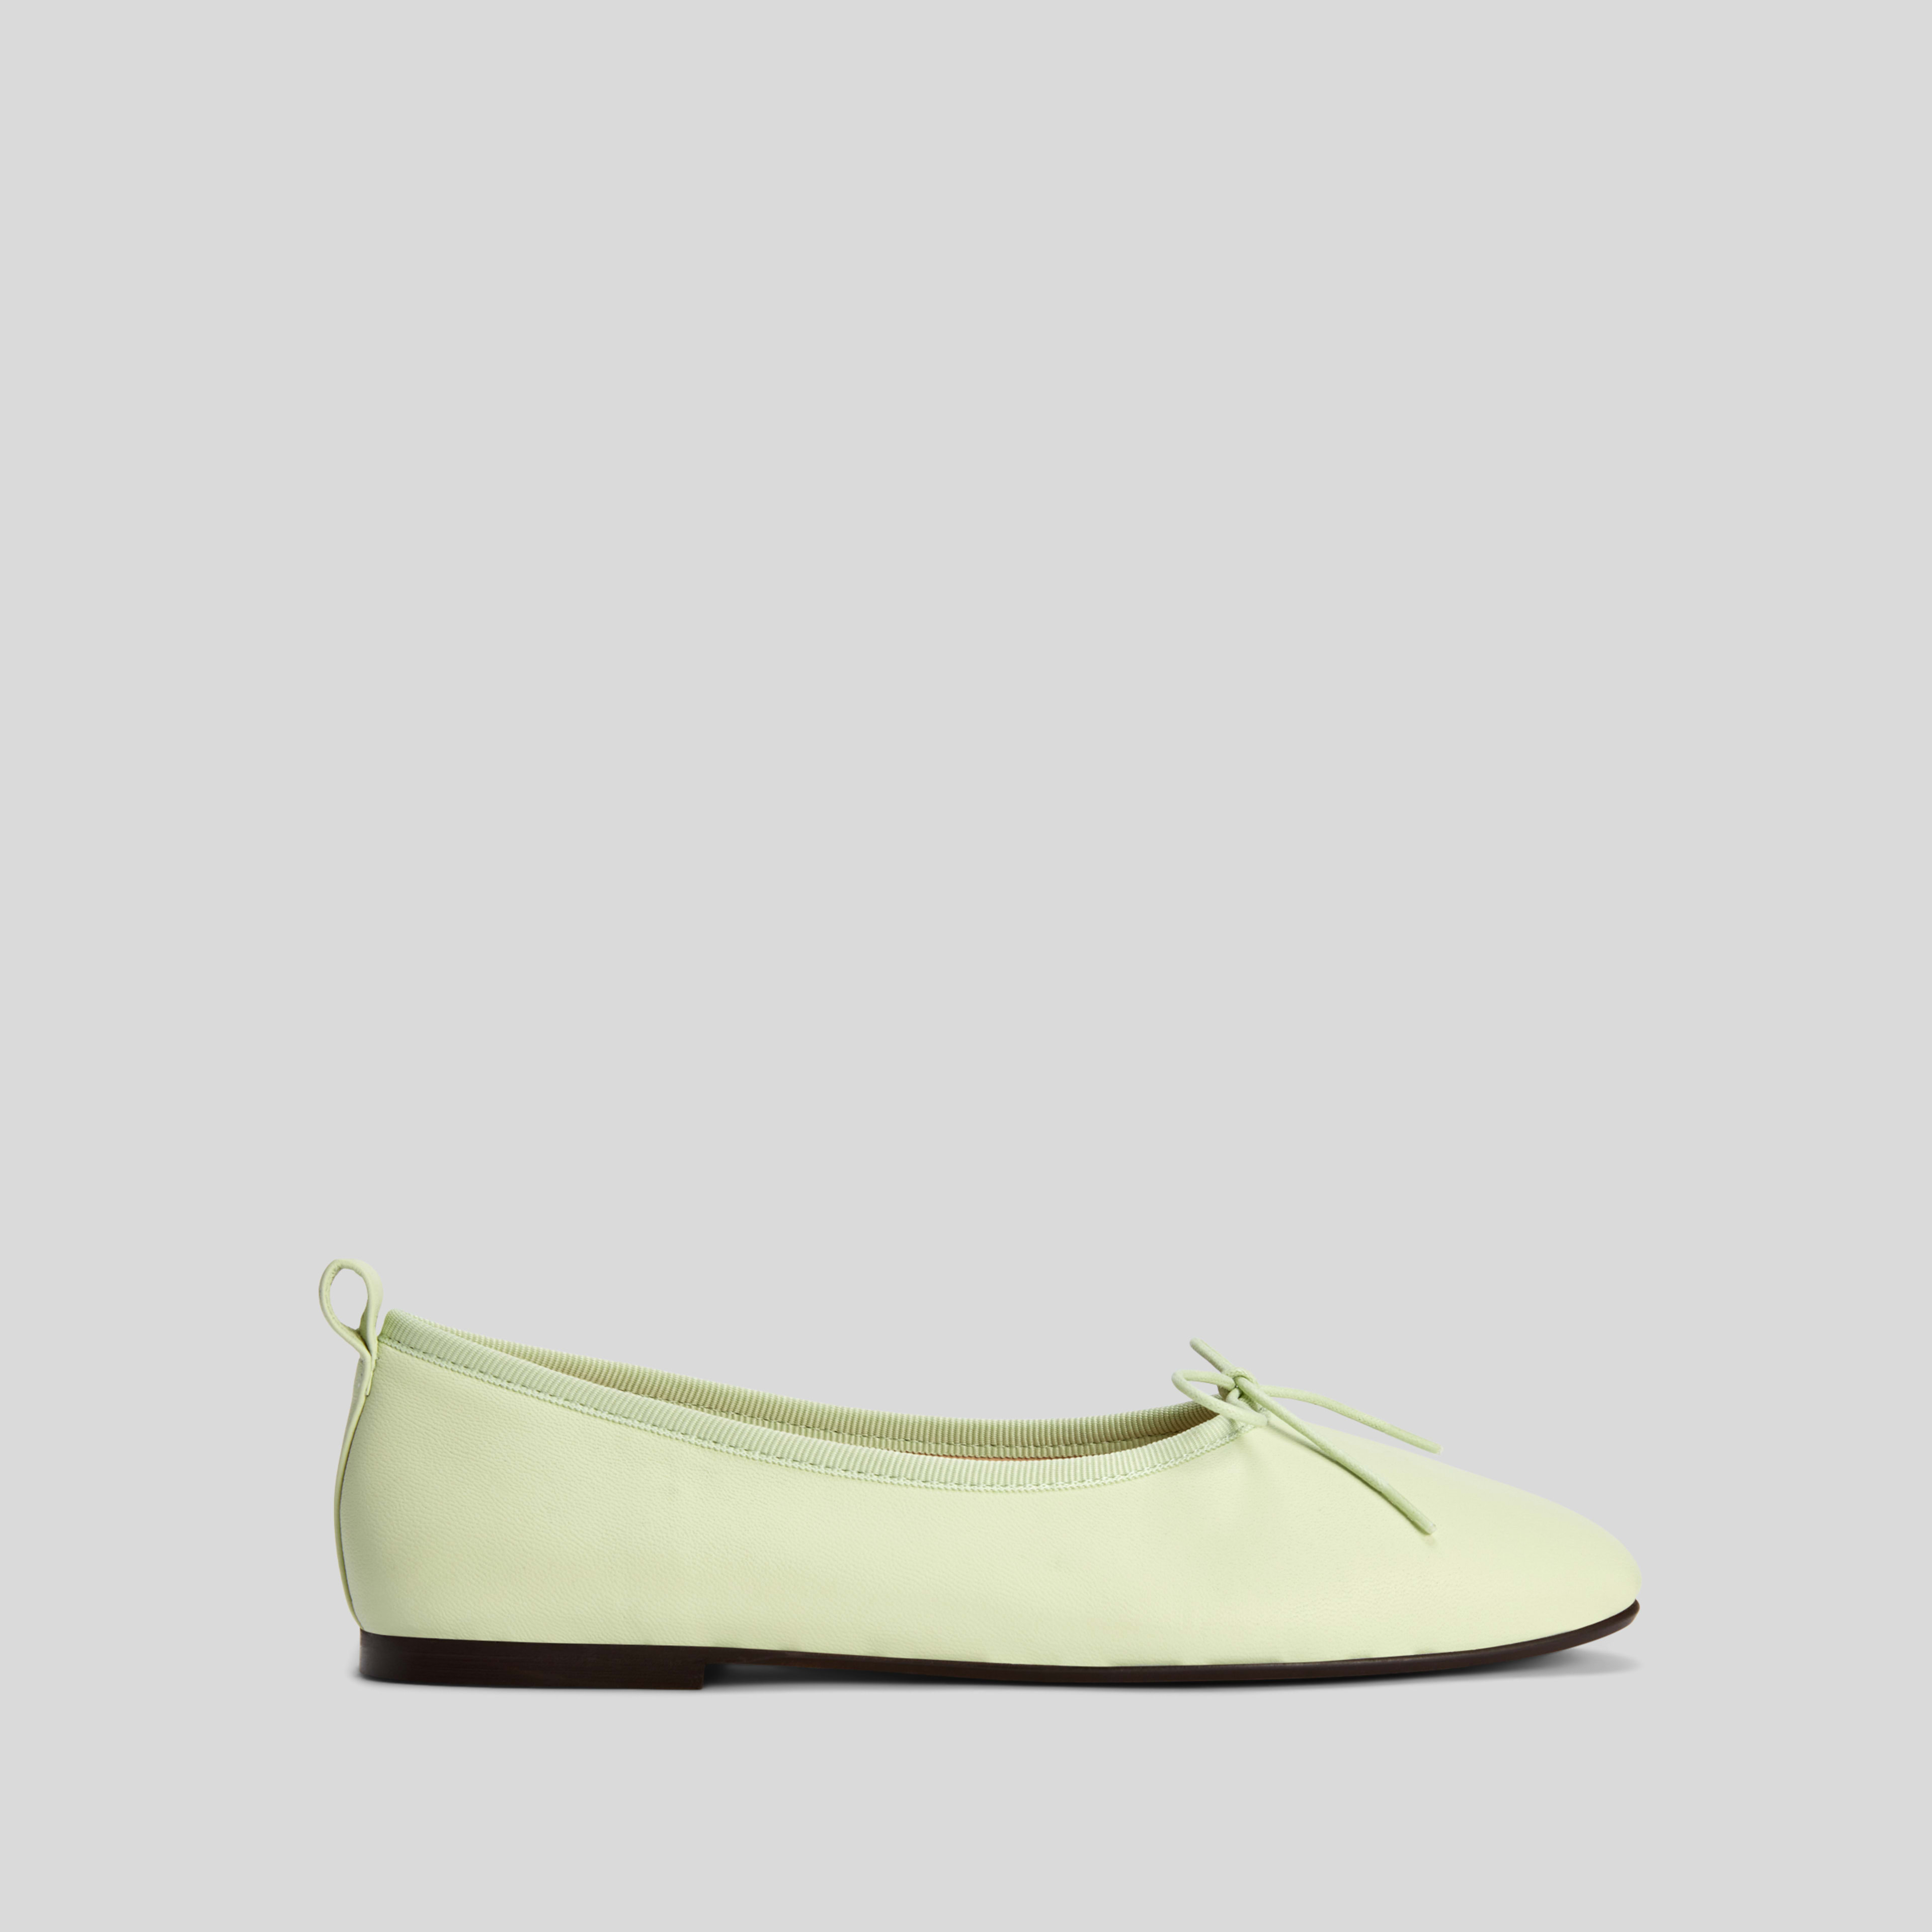 Shop 34 Comfortable Pairs of Chic Ballet Flats for Spring | Who What Wear